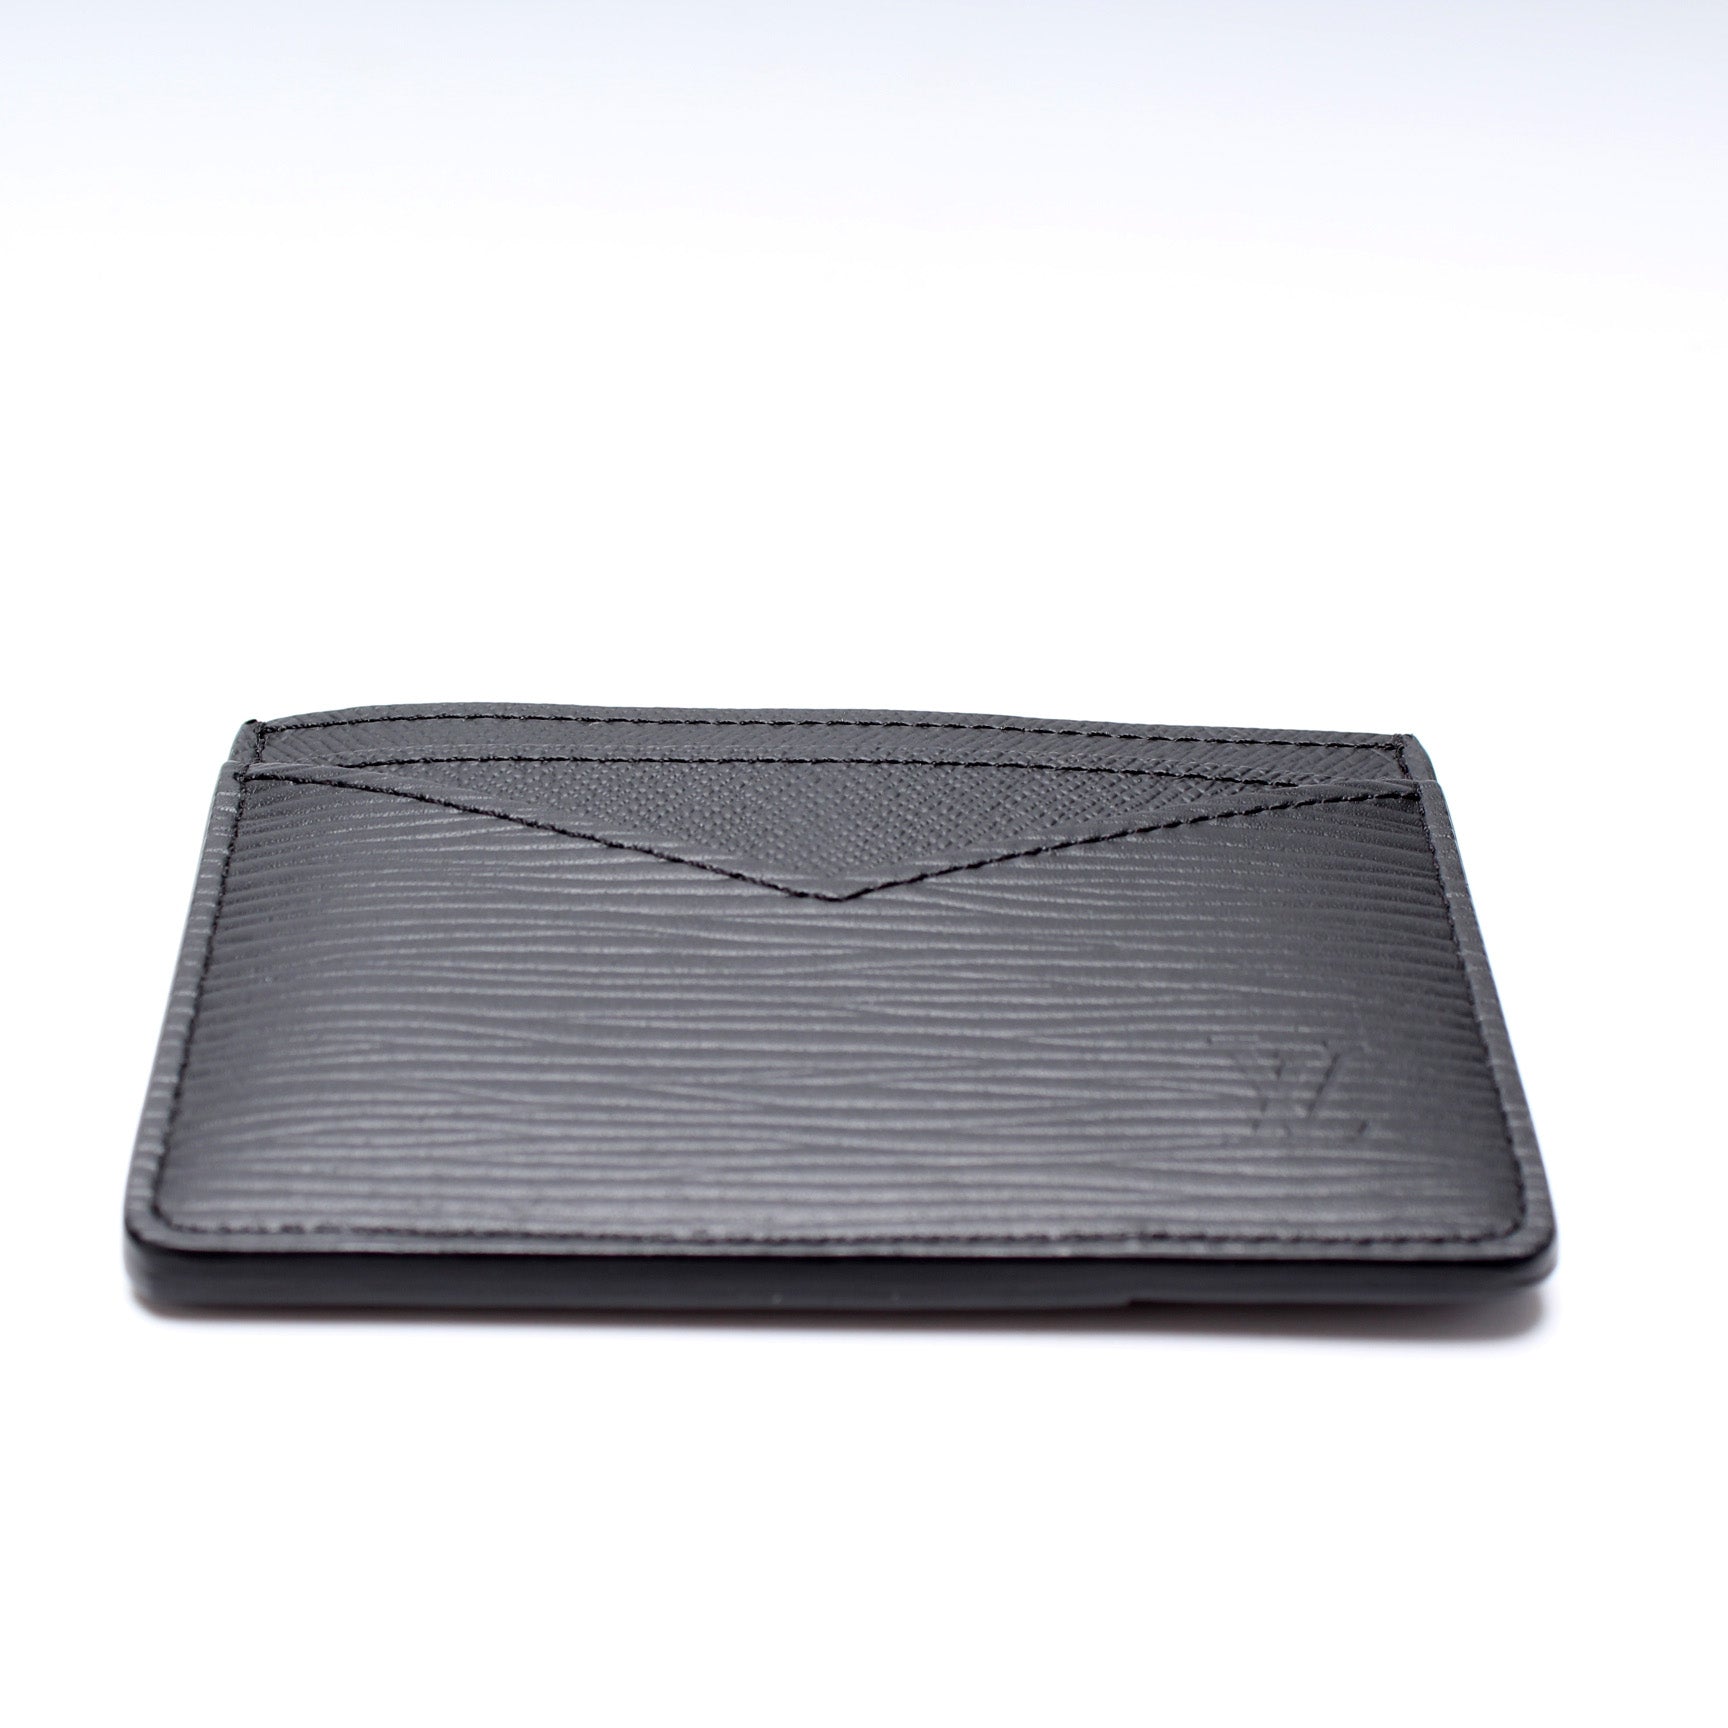 Neo Porte Cartes Epi Leather - Wallets and Small Leather Goods